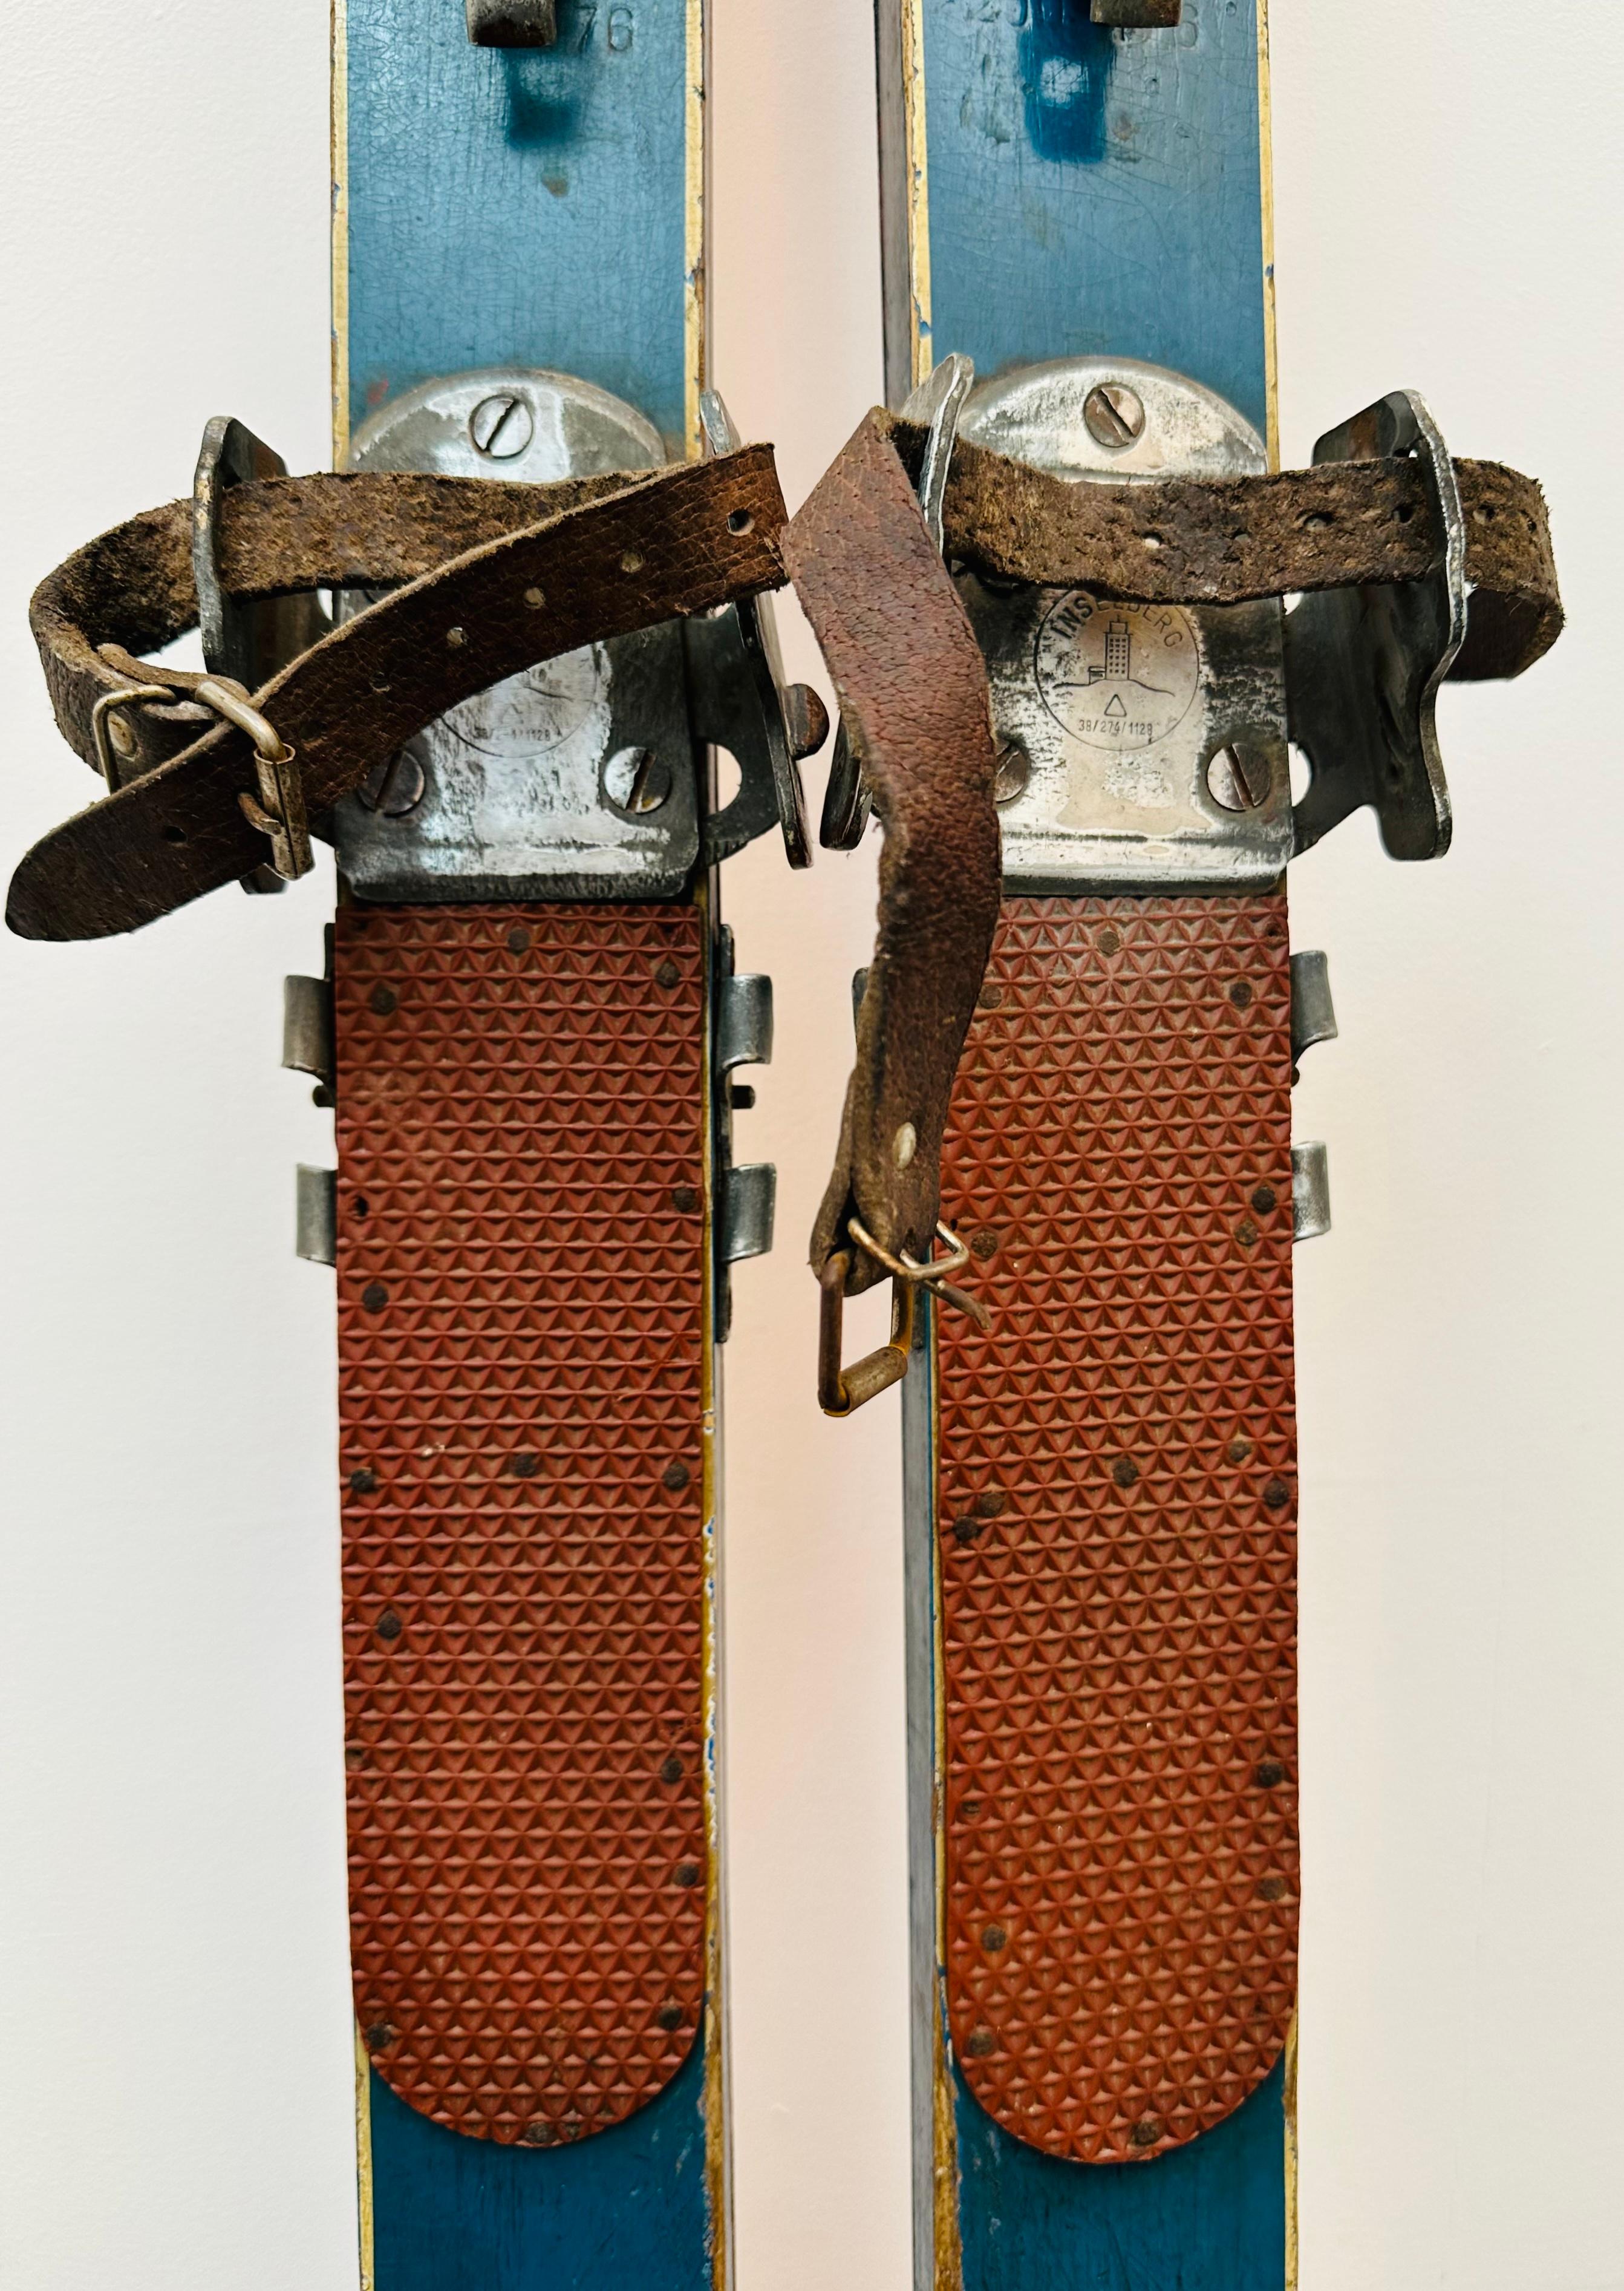 Painted Vintage Circa 1950s Wooden Skis with Bindings by Spezial Schichten Hohnberg For Sale